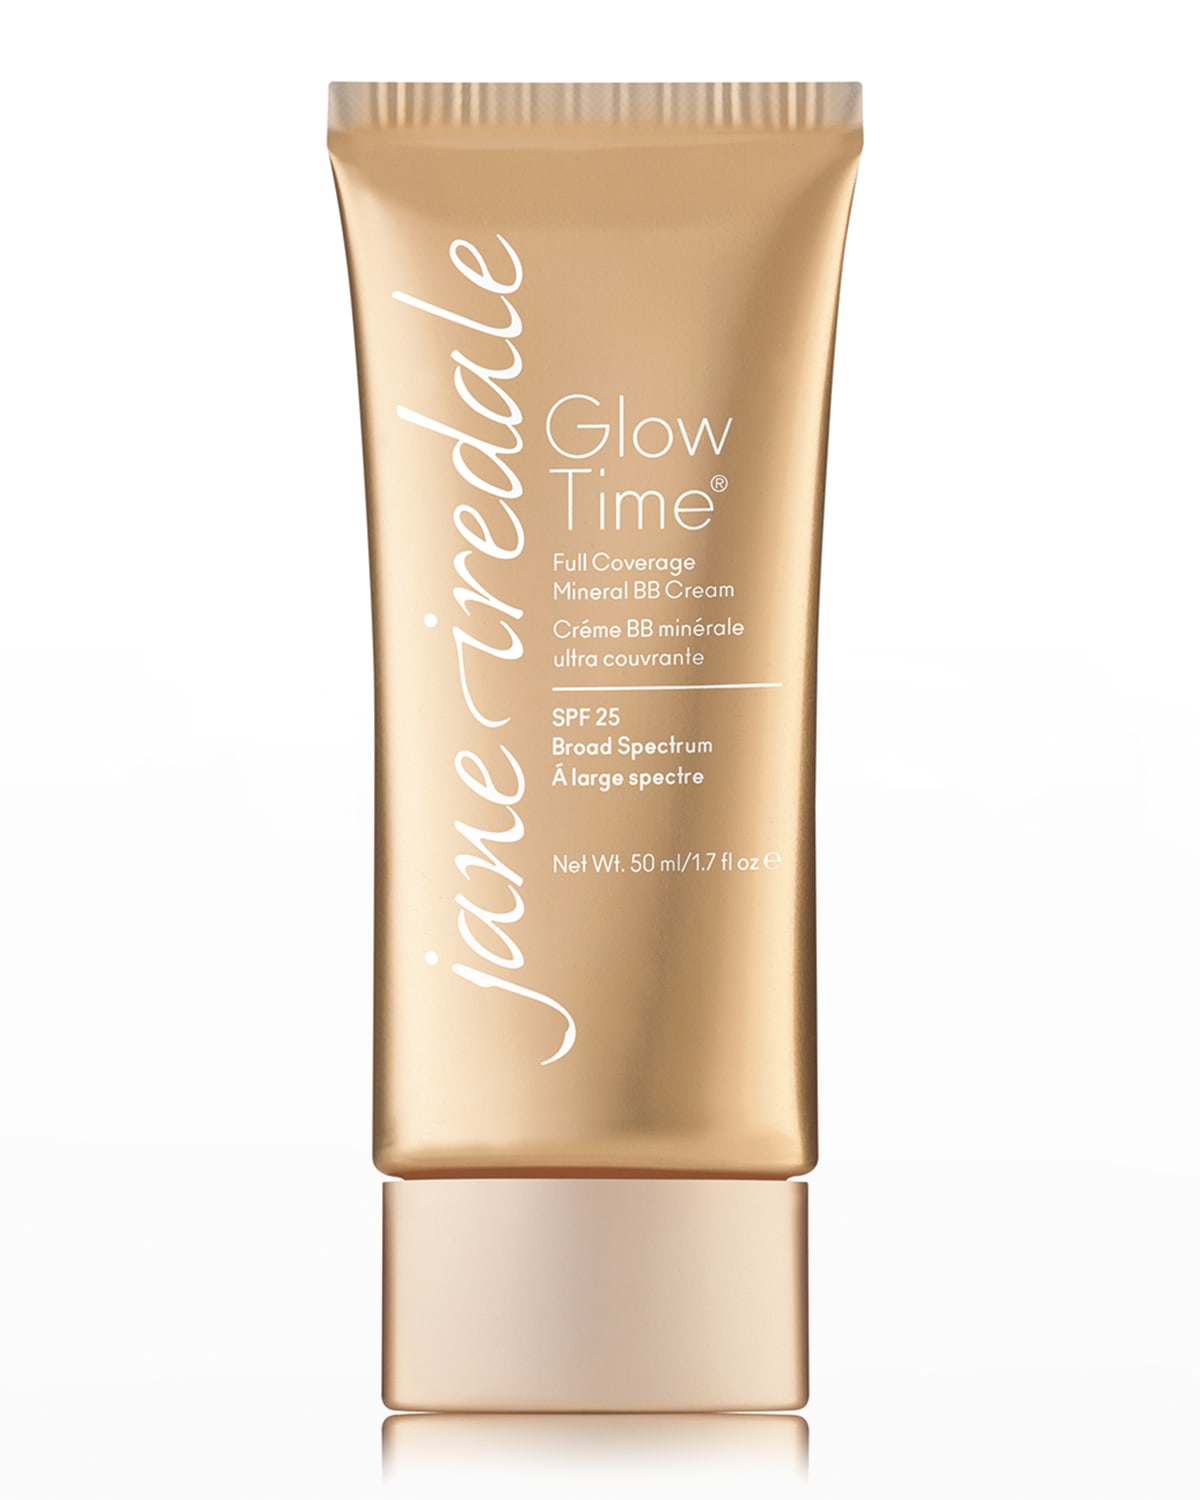 Jane Iredale Glow Time Full Coverage Mineral BB Cream, 1.7 oz.